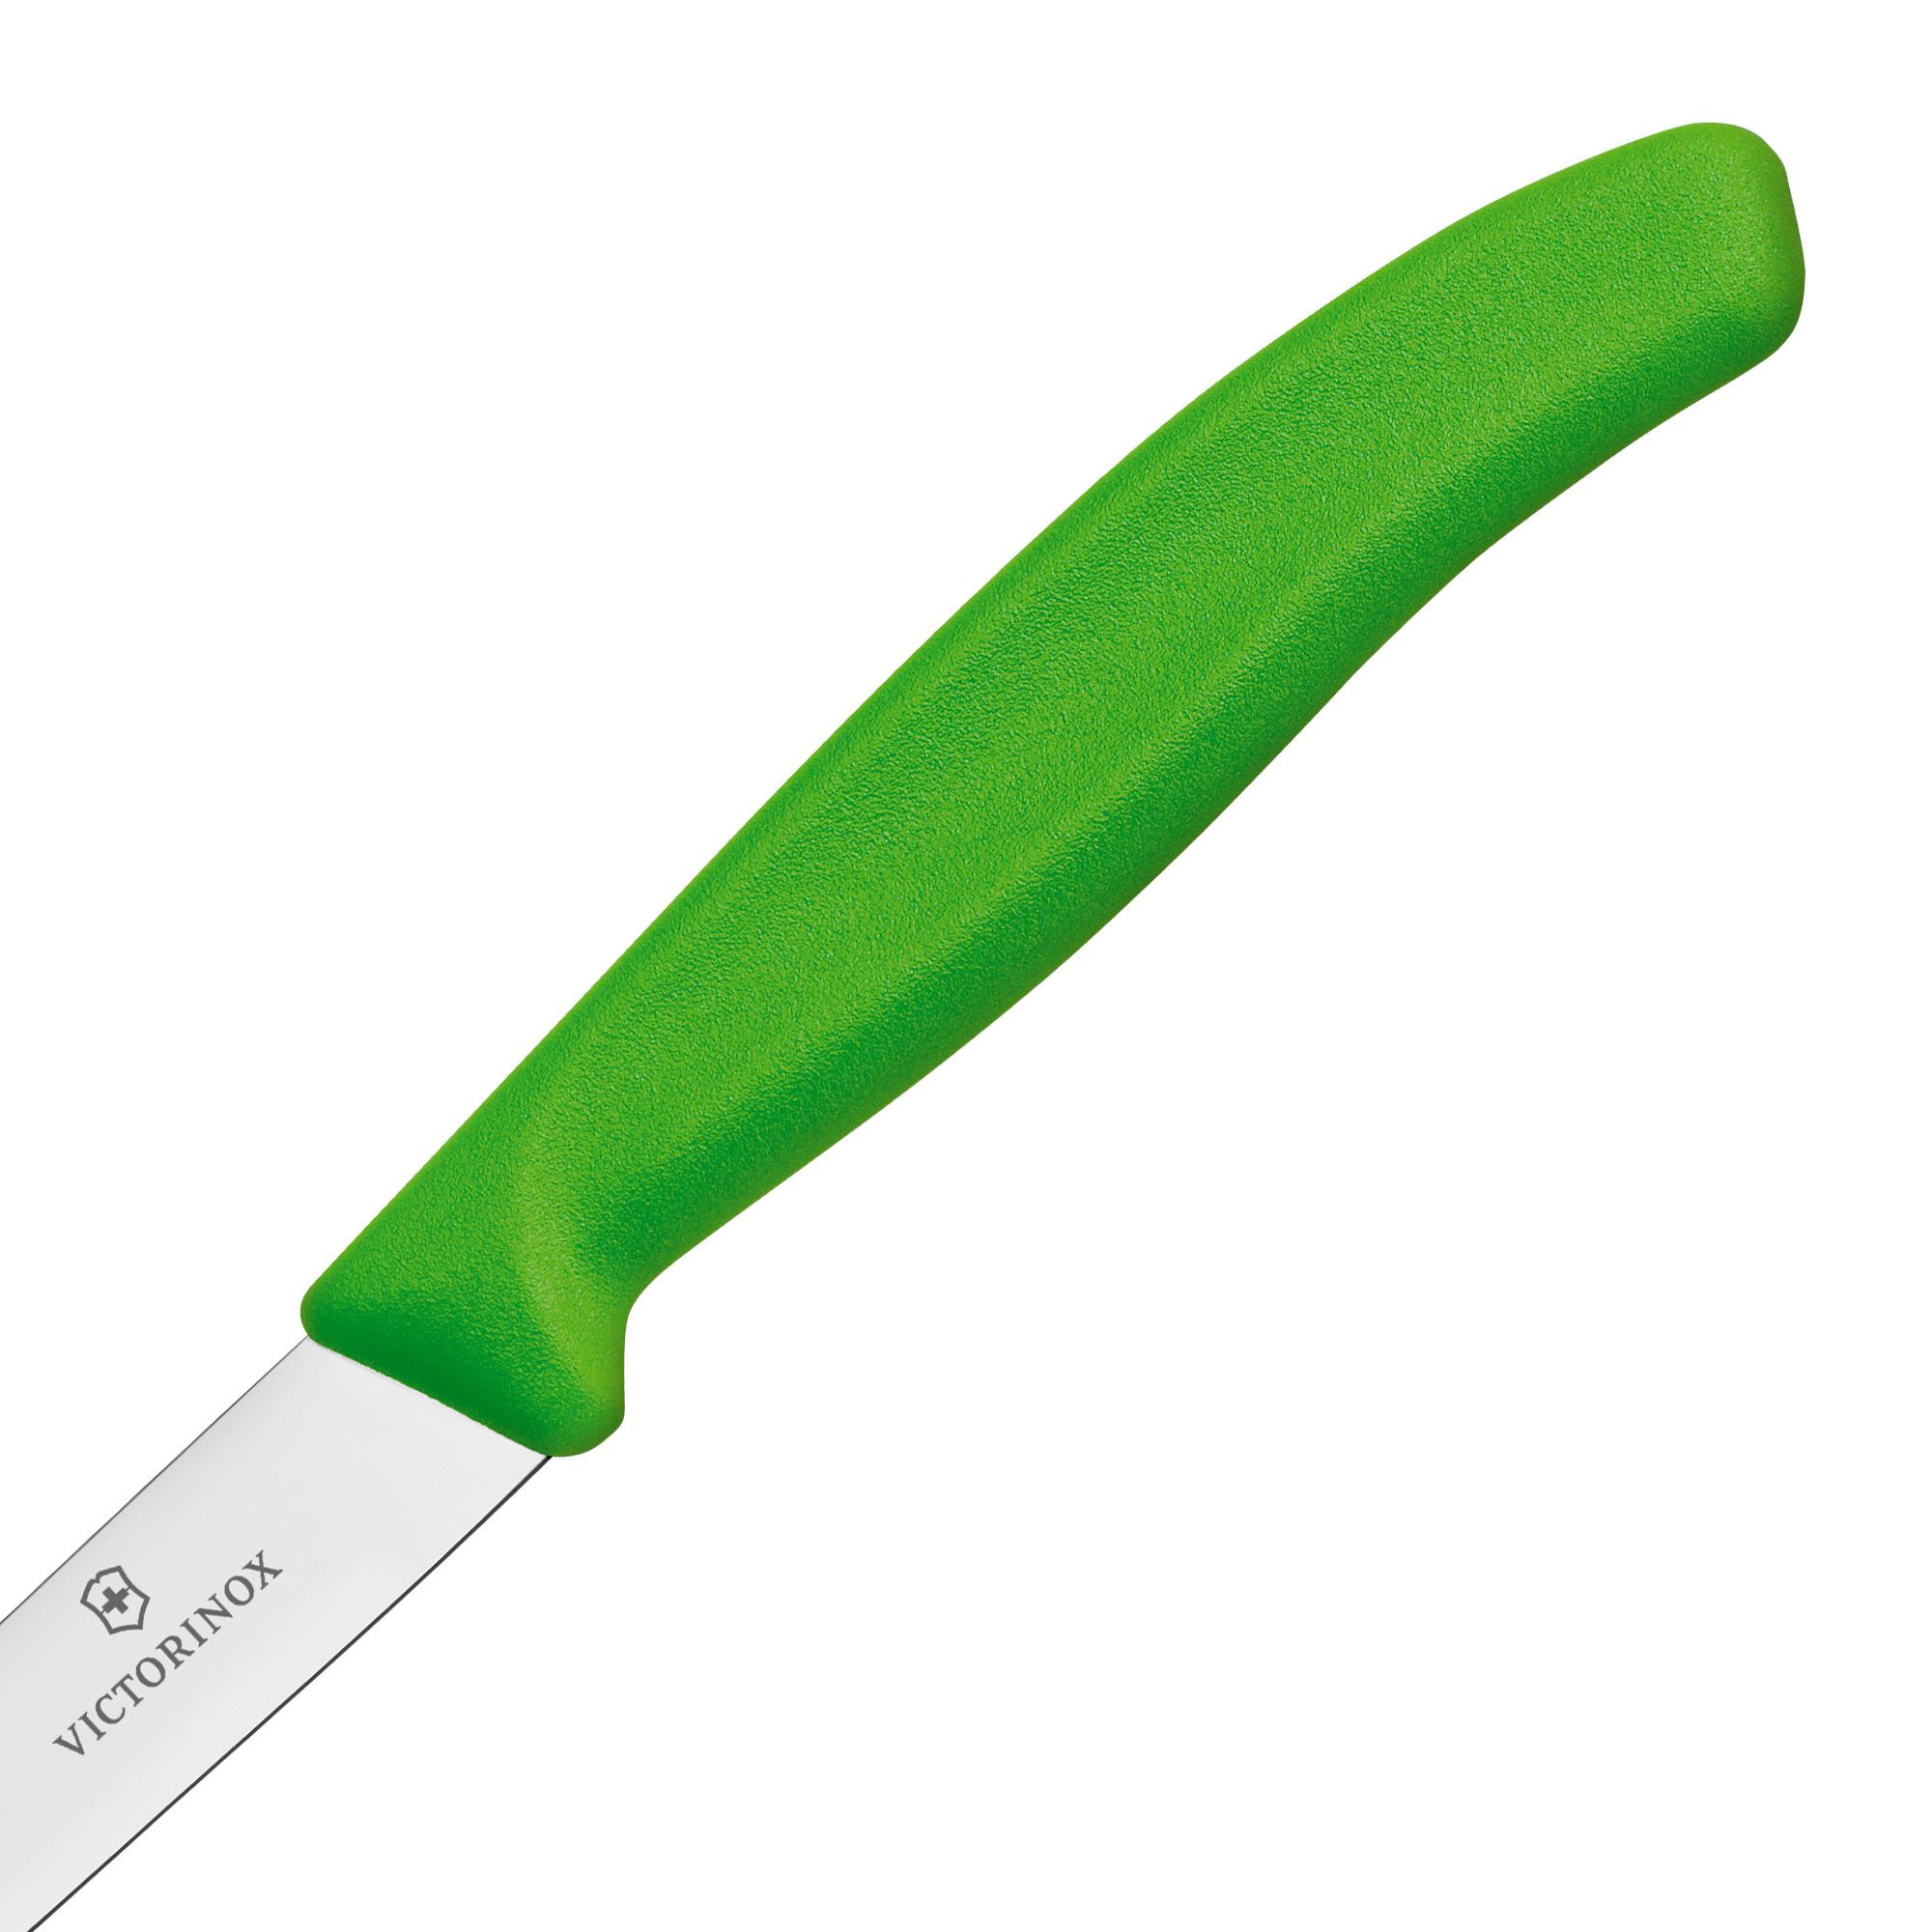 Victorinox Swiss Classic Pointed Tip Vegetable Knife 10cm Green Image 3